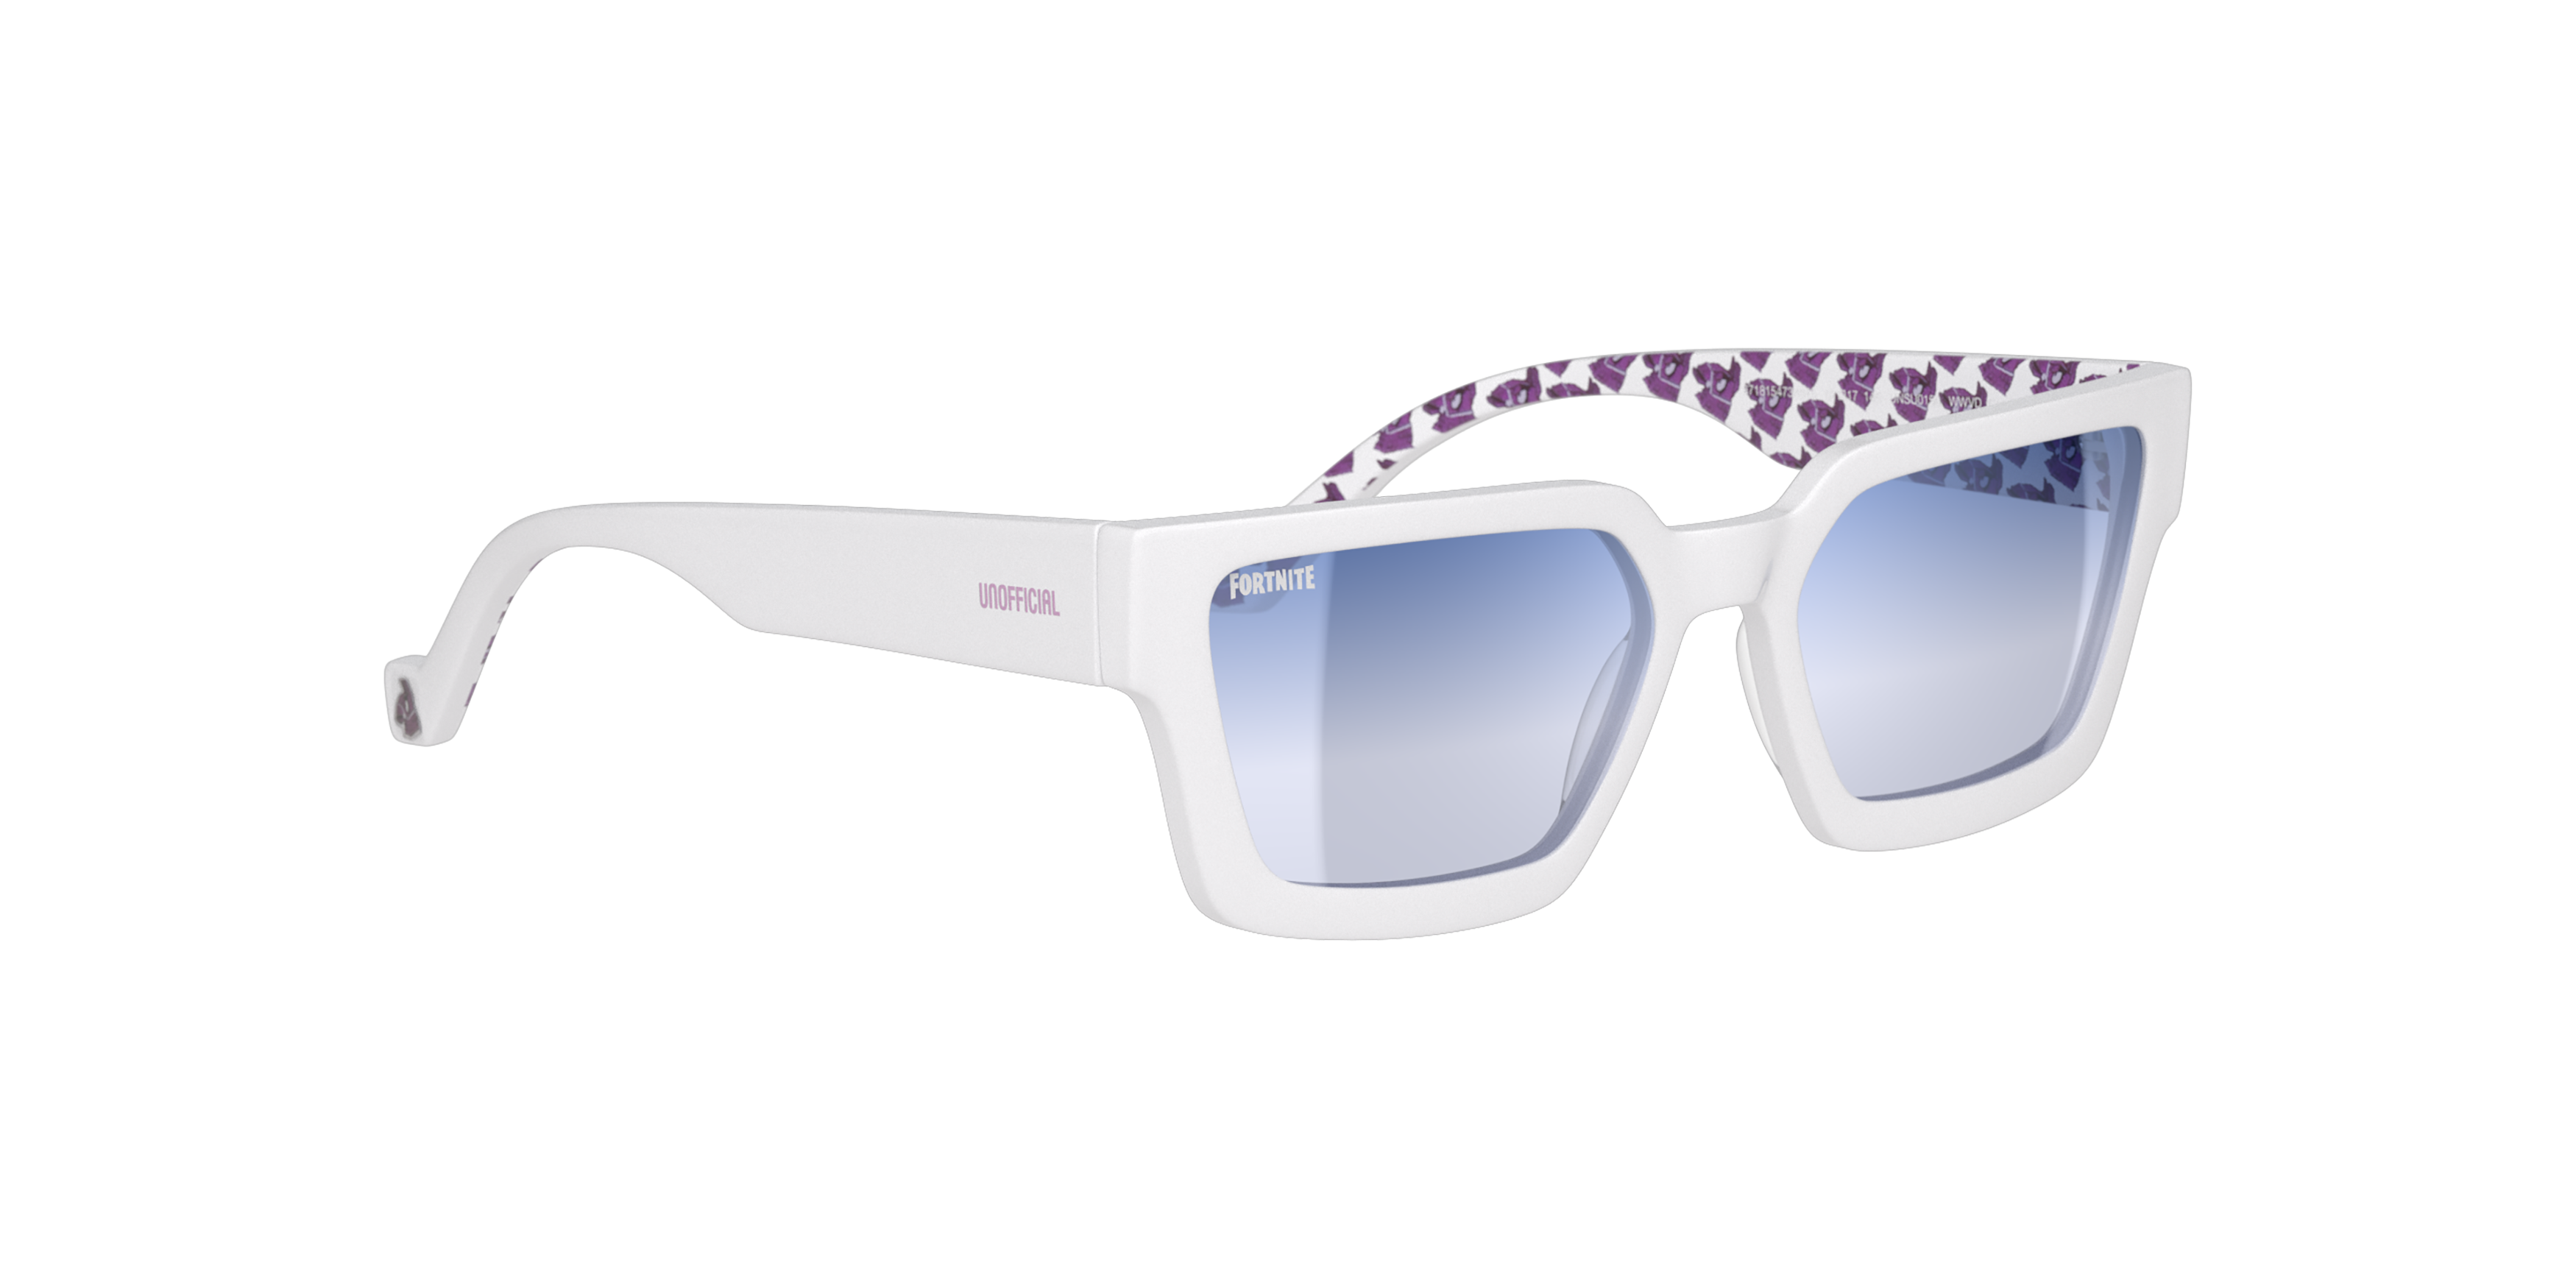 Angle_Right01 Fortnite with Unofficial UNSU0150 Sunglasses Violet / White